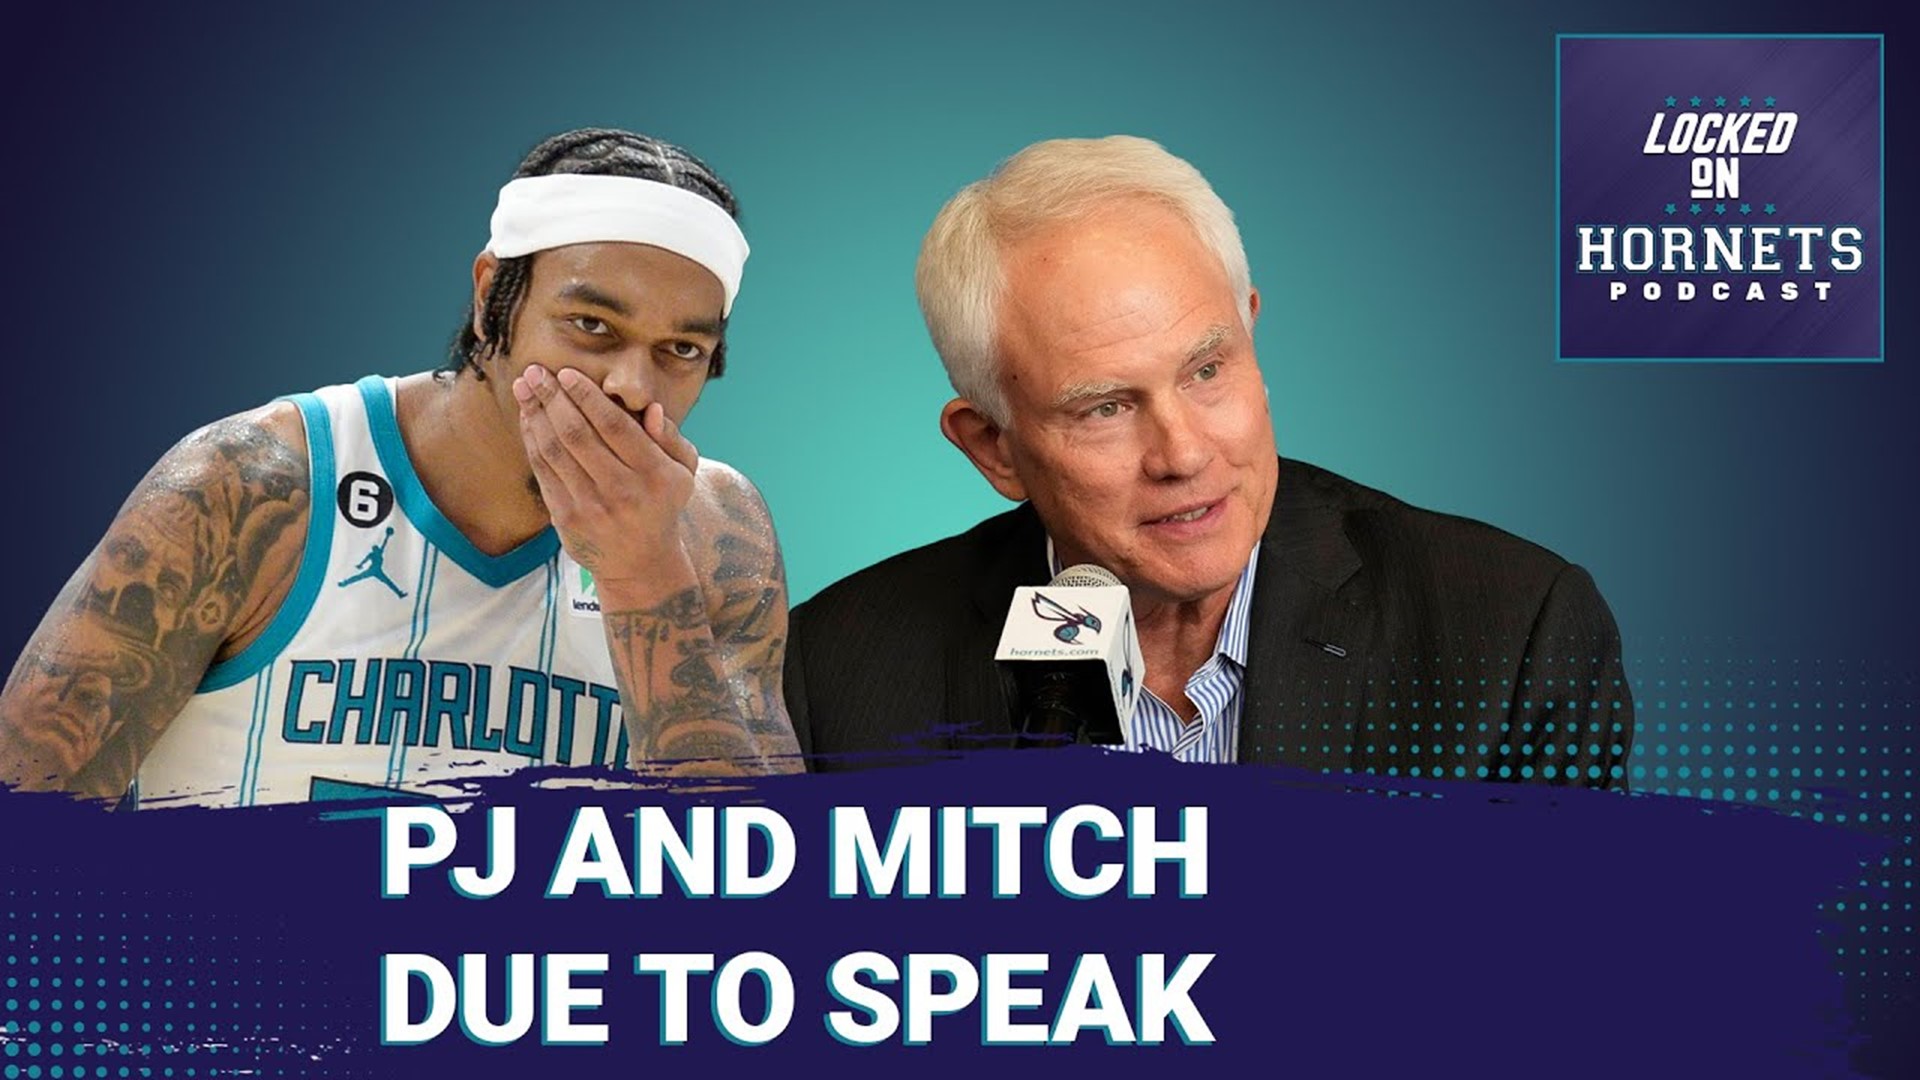 PJ Washington and Charlotte Hornets GM Mitch Kupchak due to speak. What do we want to hear?